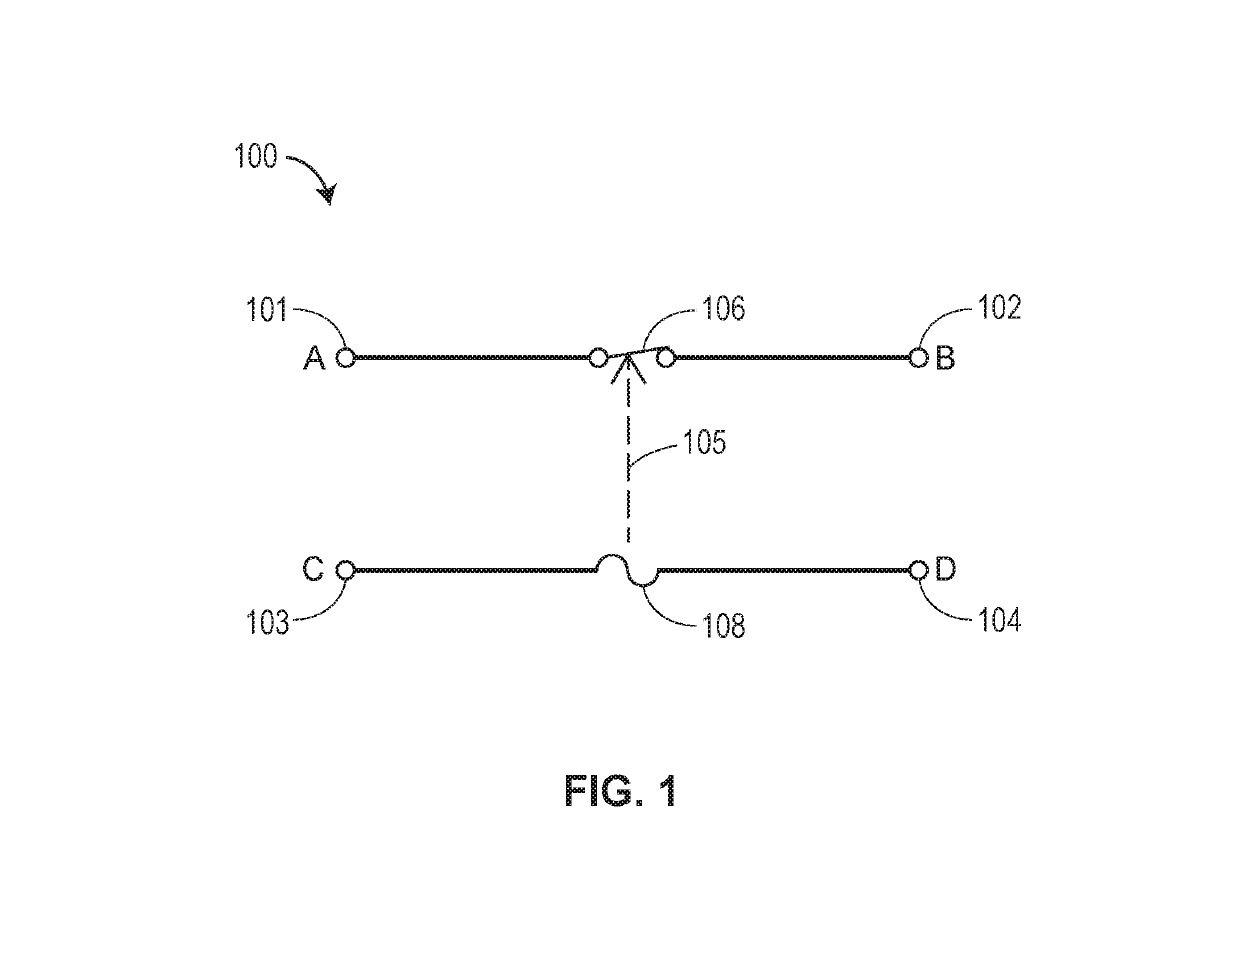 Overcurrent protection devices and circuits for shielded cables